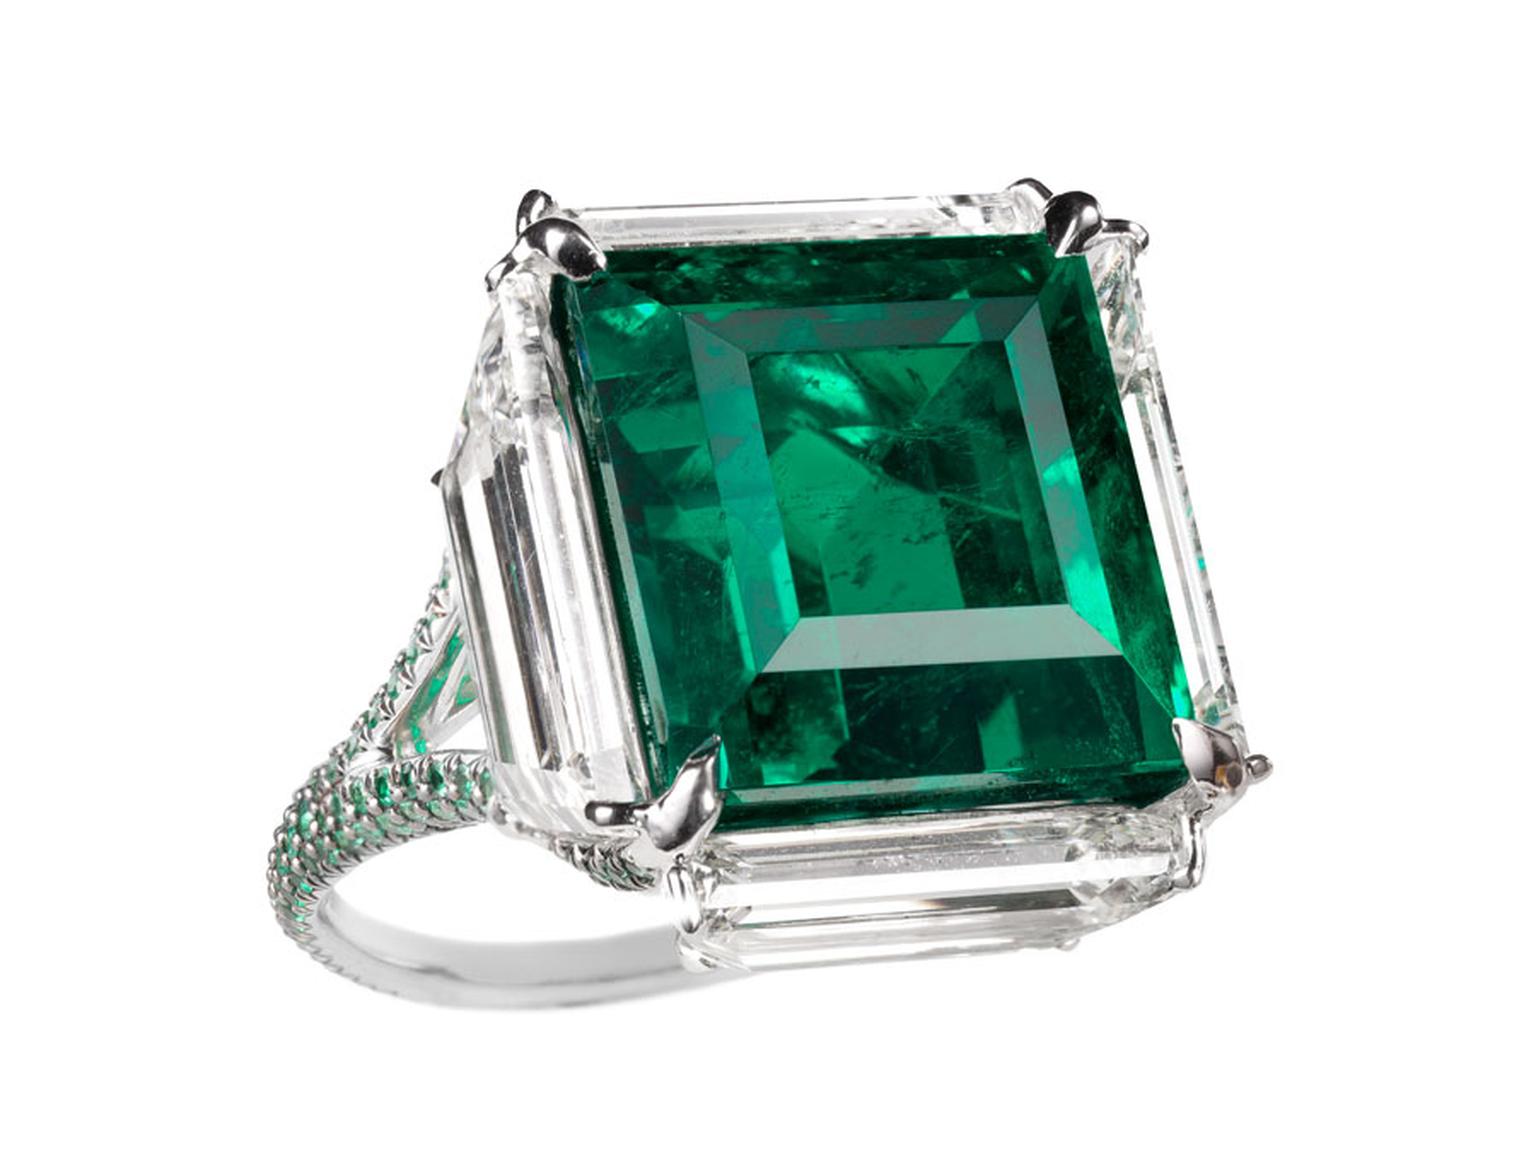 MPL-2013-BOGH-ART-Colombian-Emerald-surrounded-by-diamonds